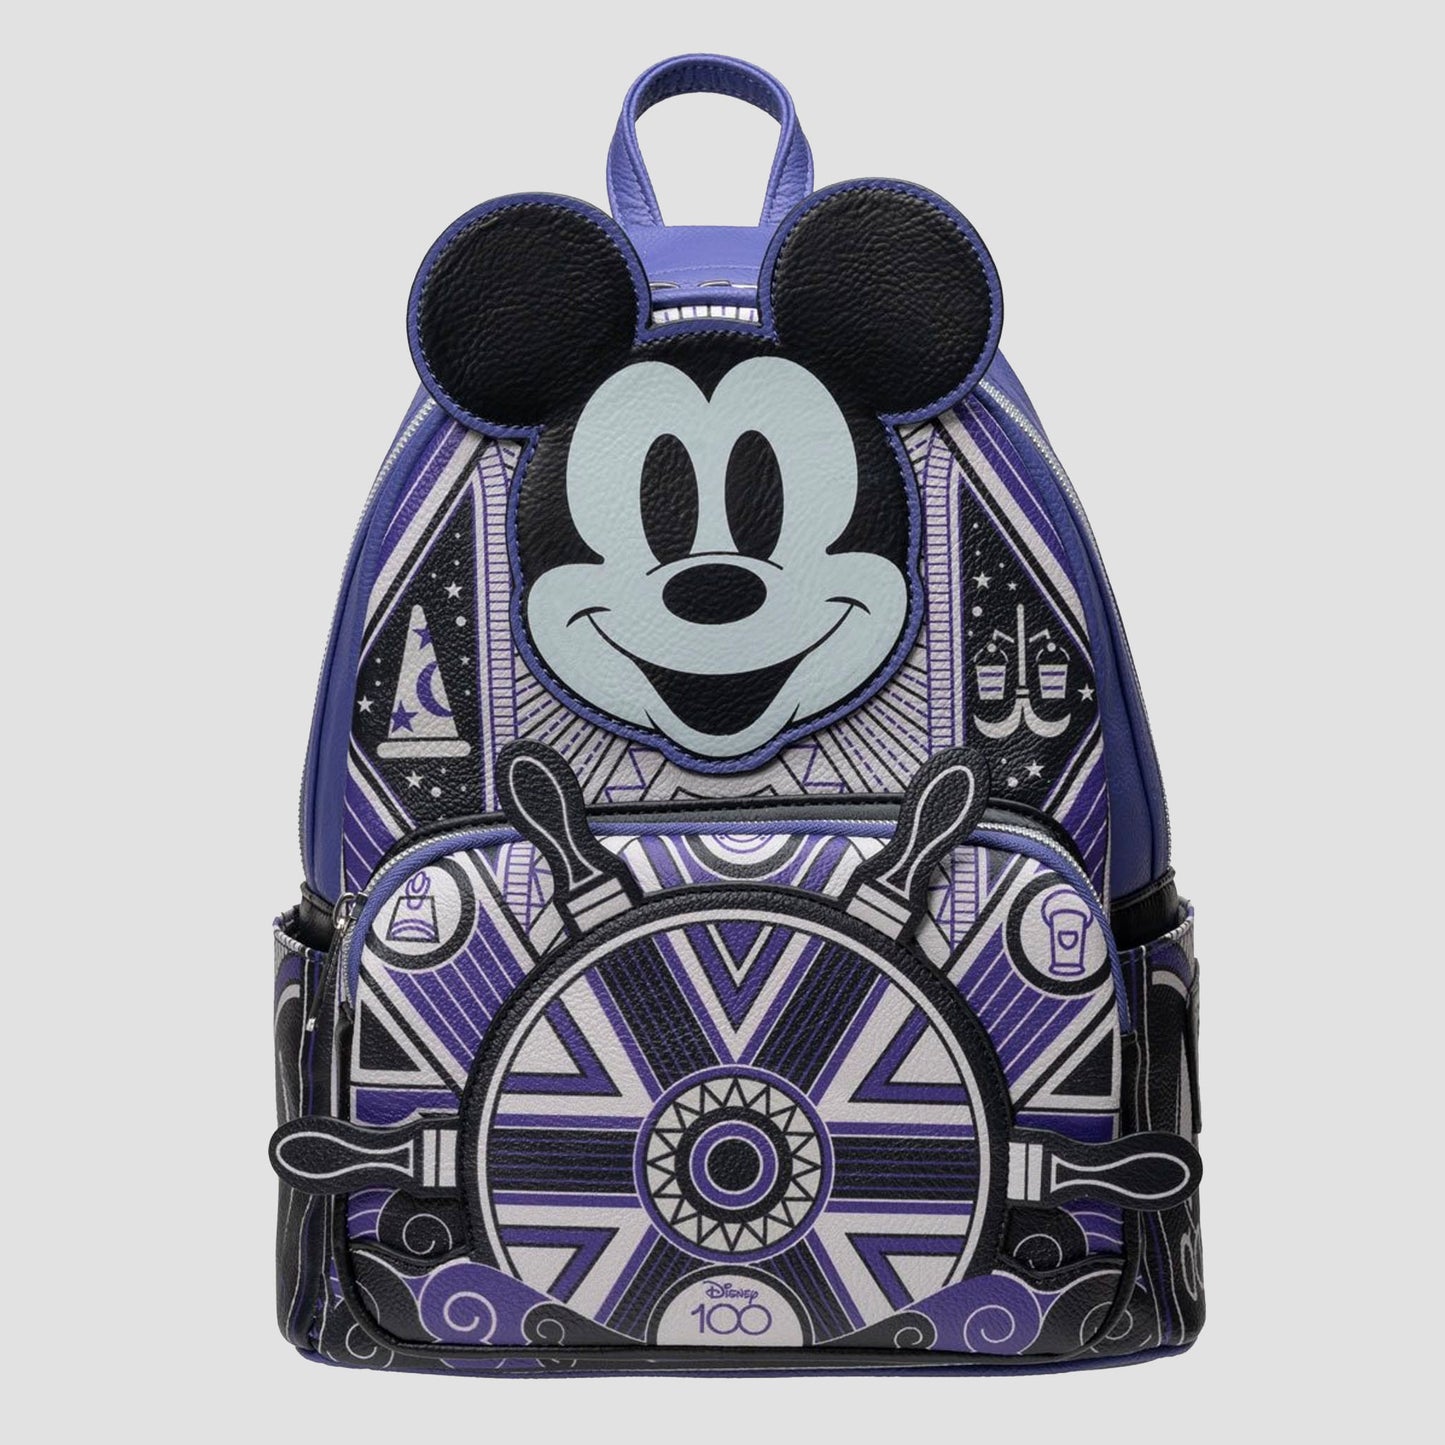 Mickey Mouse (Disney 100) Glow-in-the-Dark EE Exclusive Mini Backpack by Loungefly